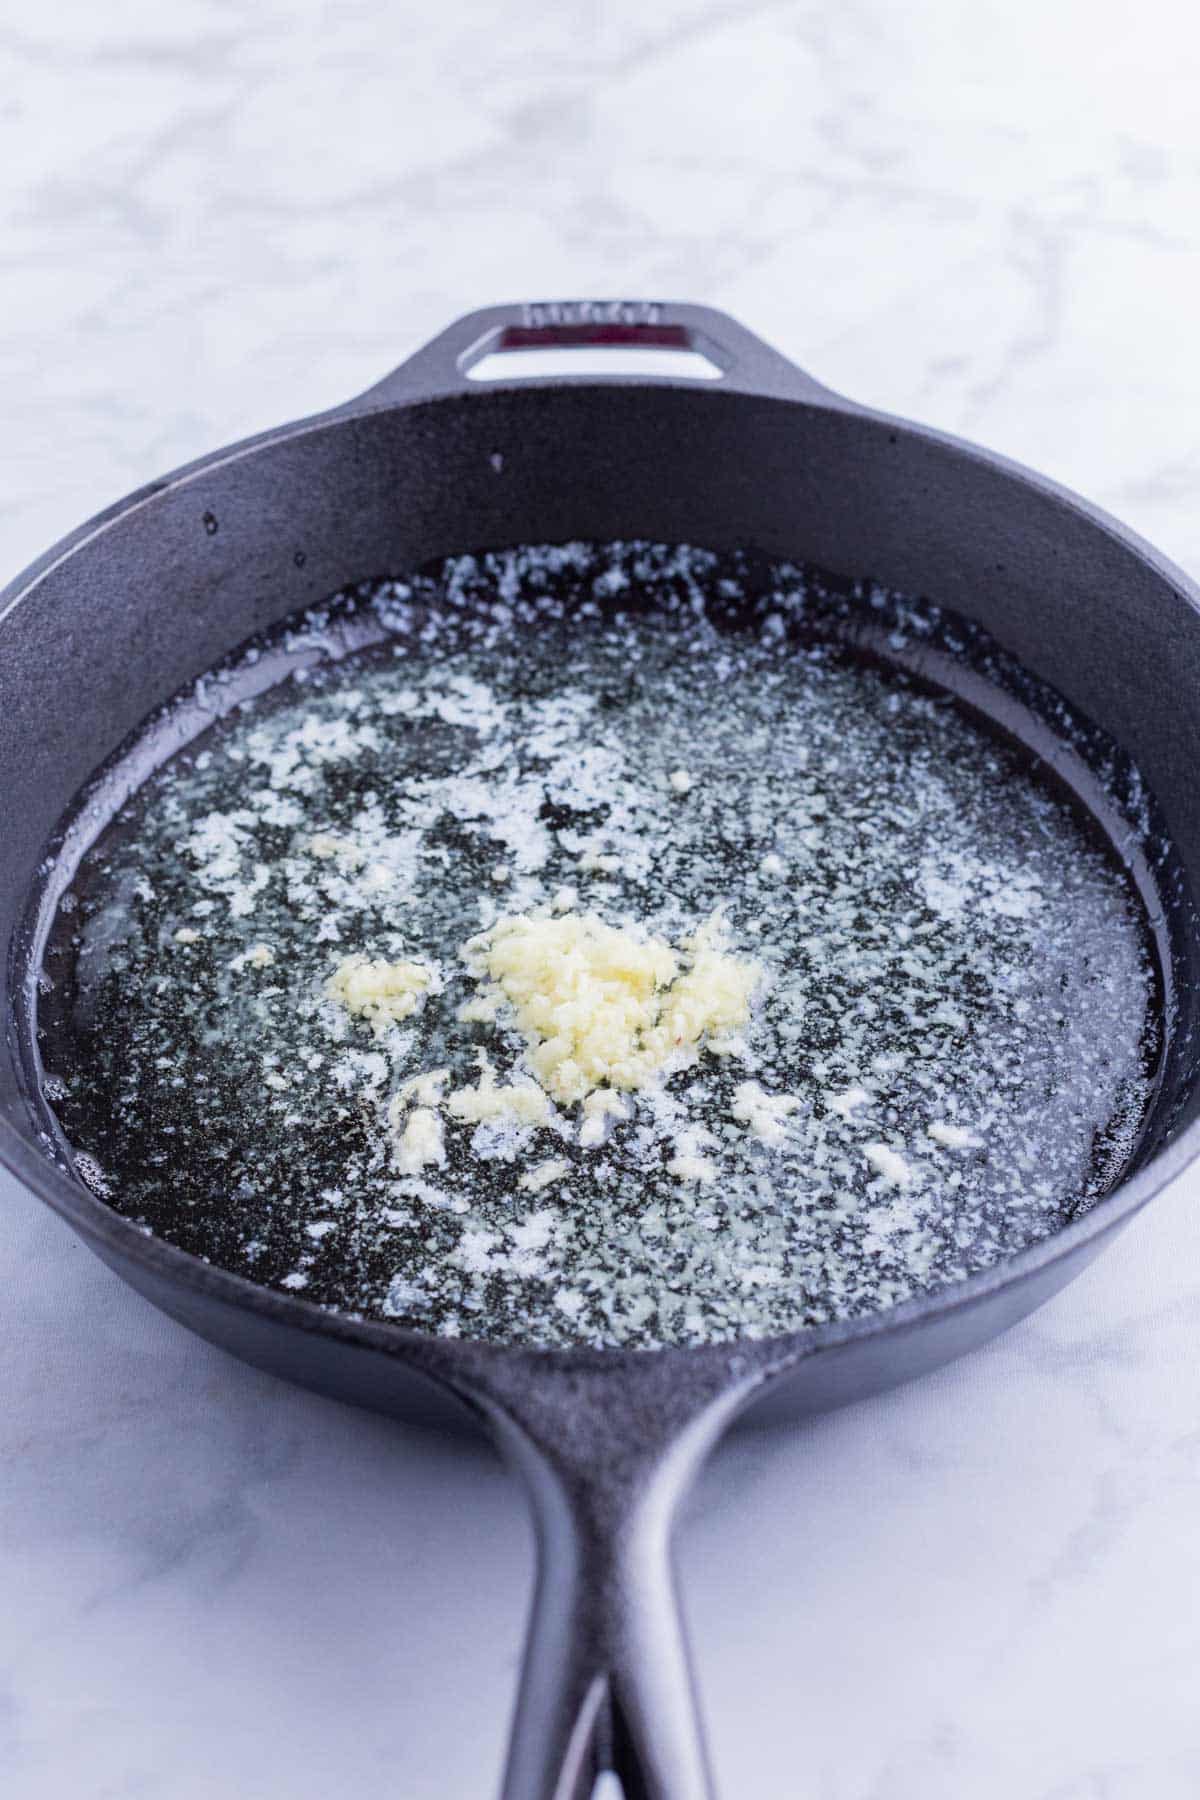 Garlic is added to the hot butter.